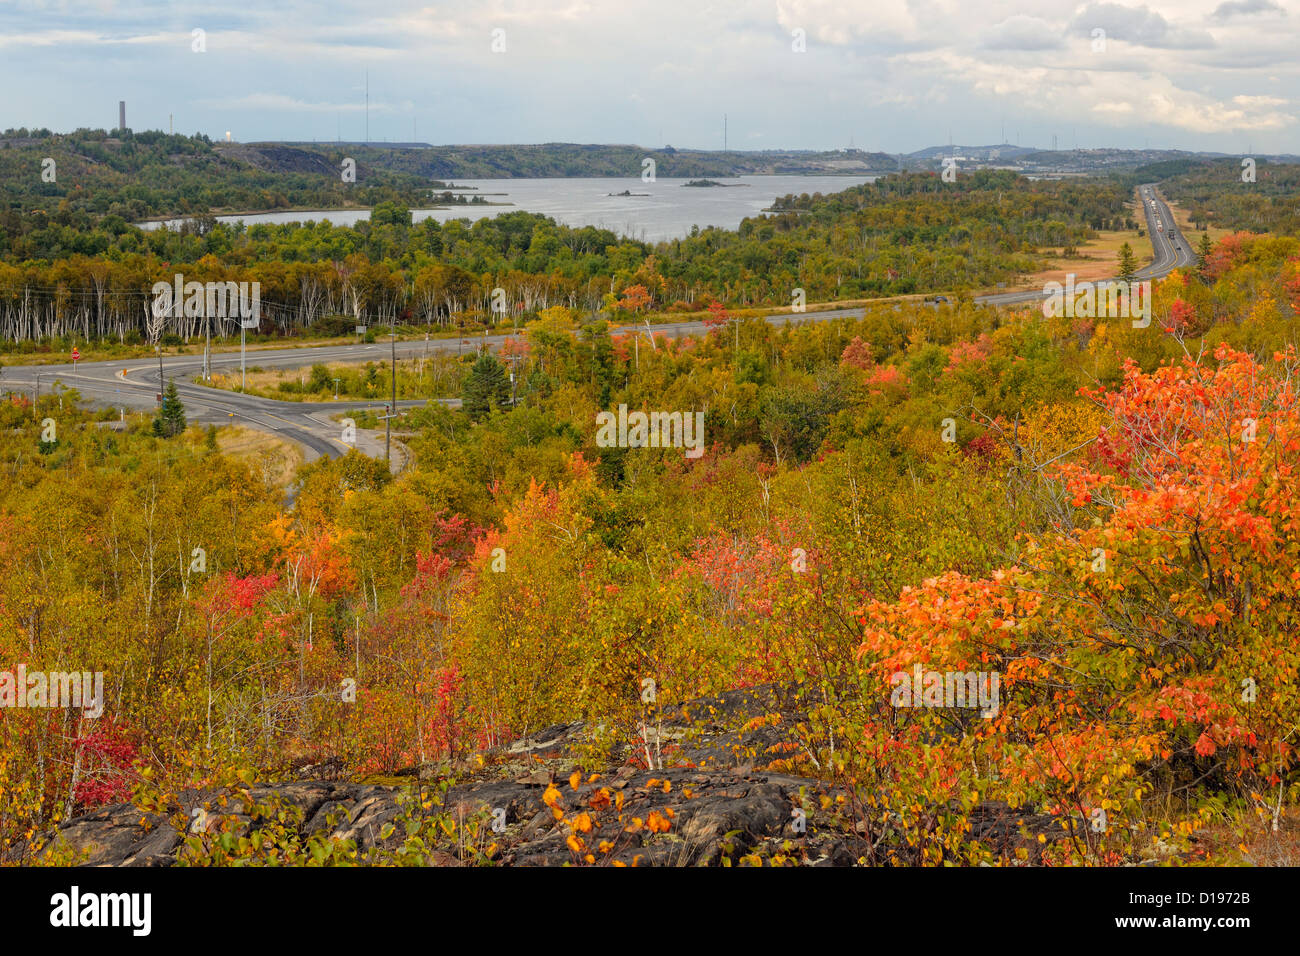 Kelly Lake and the Southwest Bypass from a high vantage point, Greater Sudbury, Ontario, Canada Stock Photo